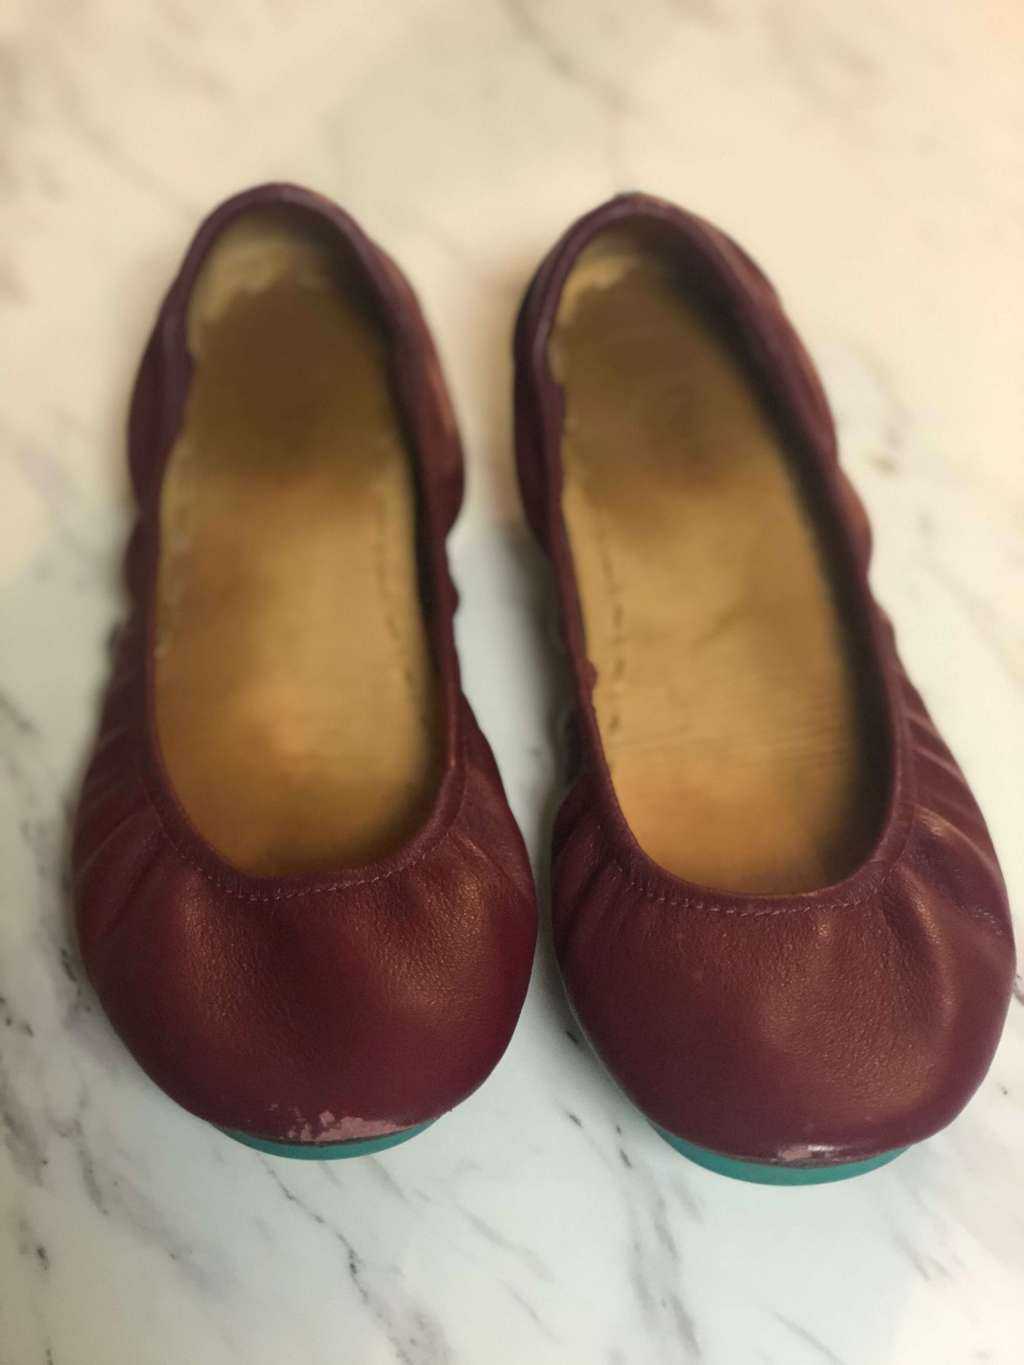 Tieks Review: How I Saved $25 Off my First Pair and Were They Worth It?